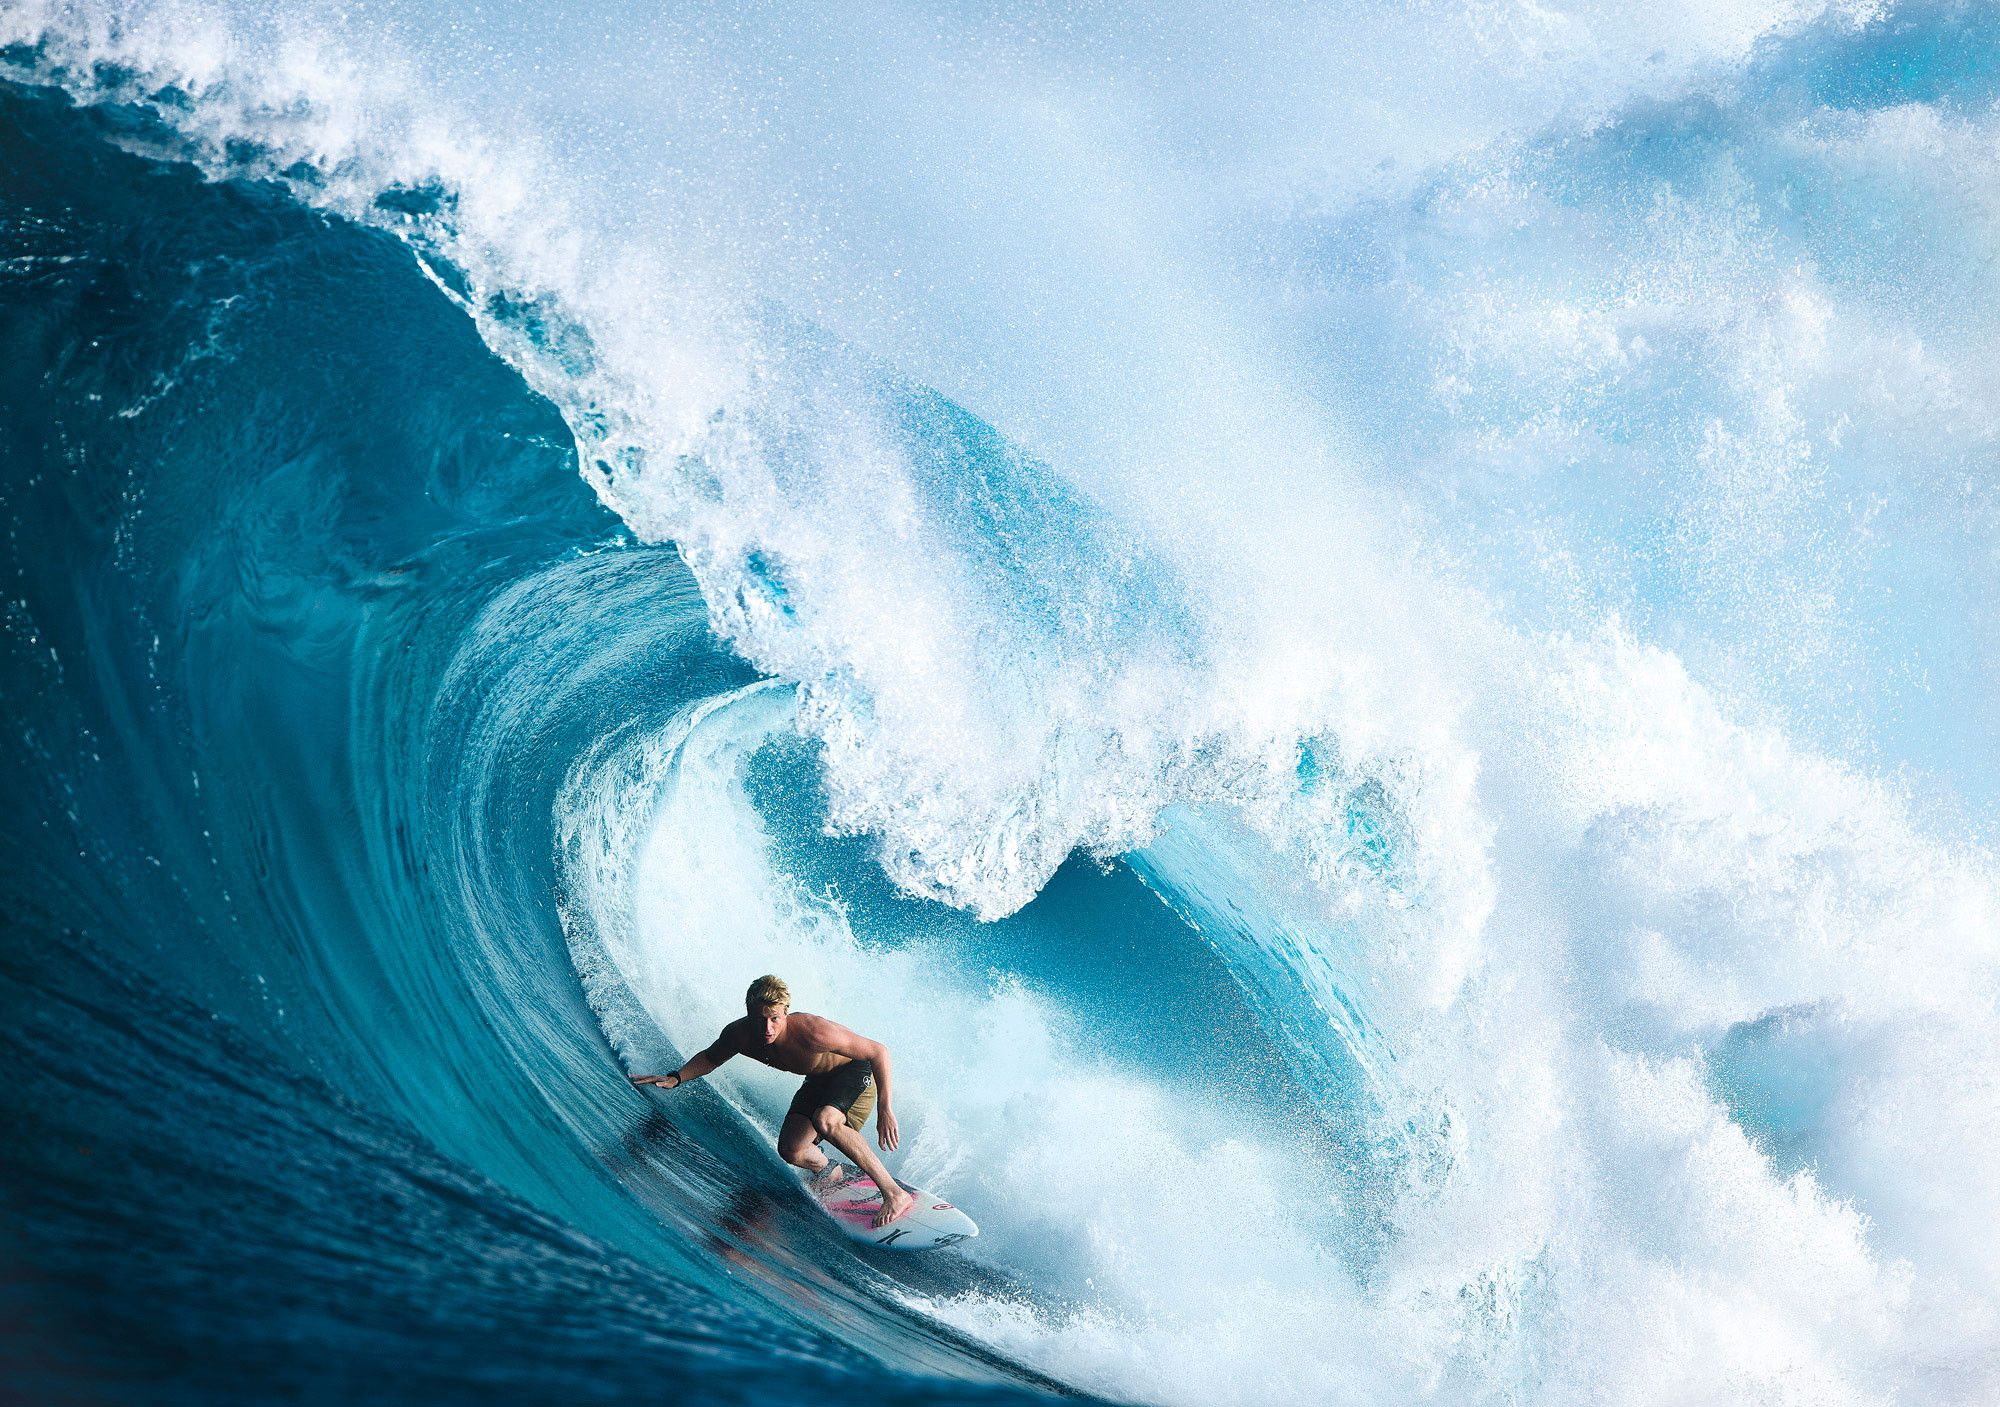 HD Surfing Wallpapers.